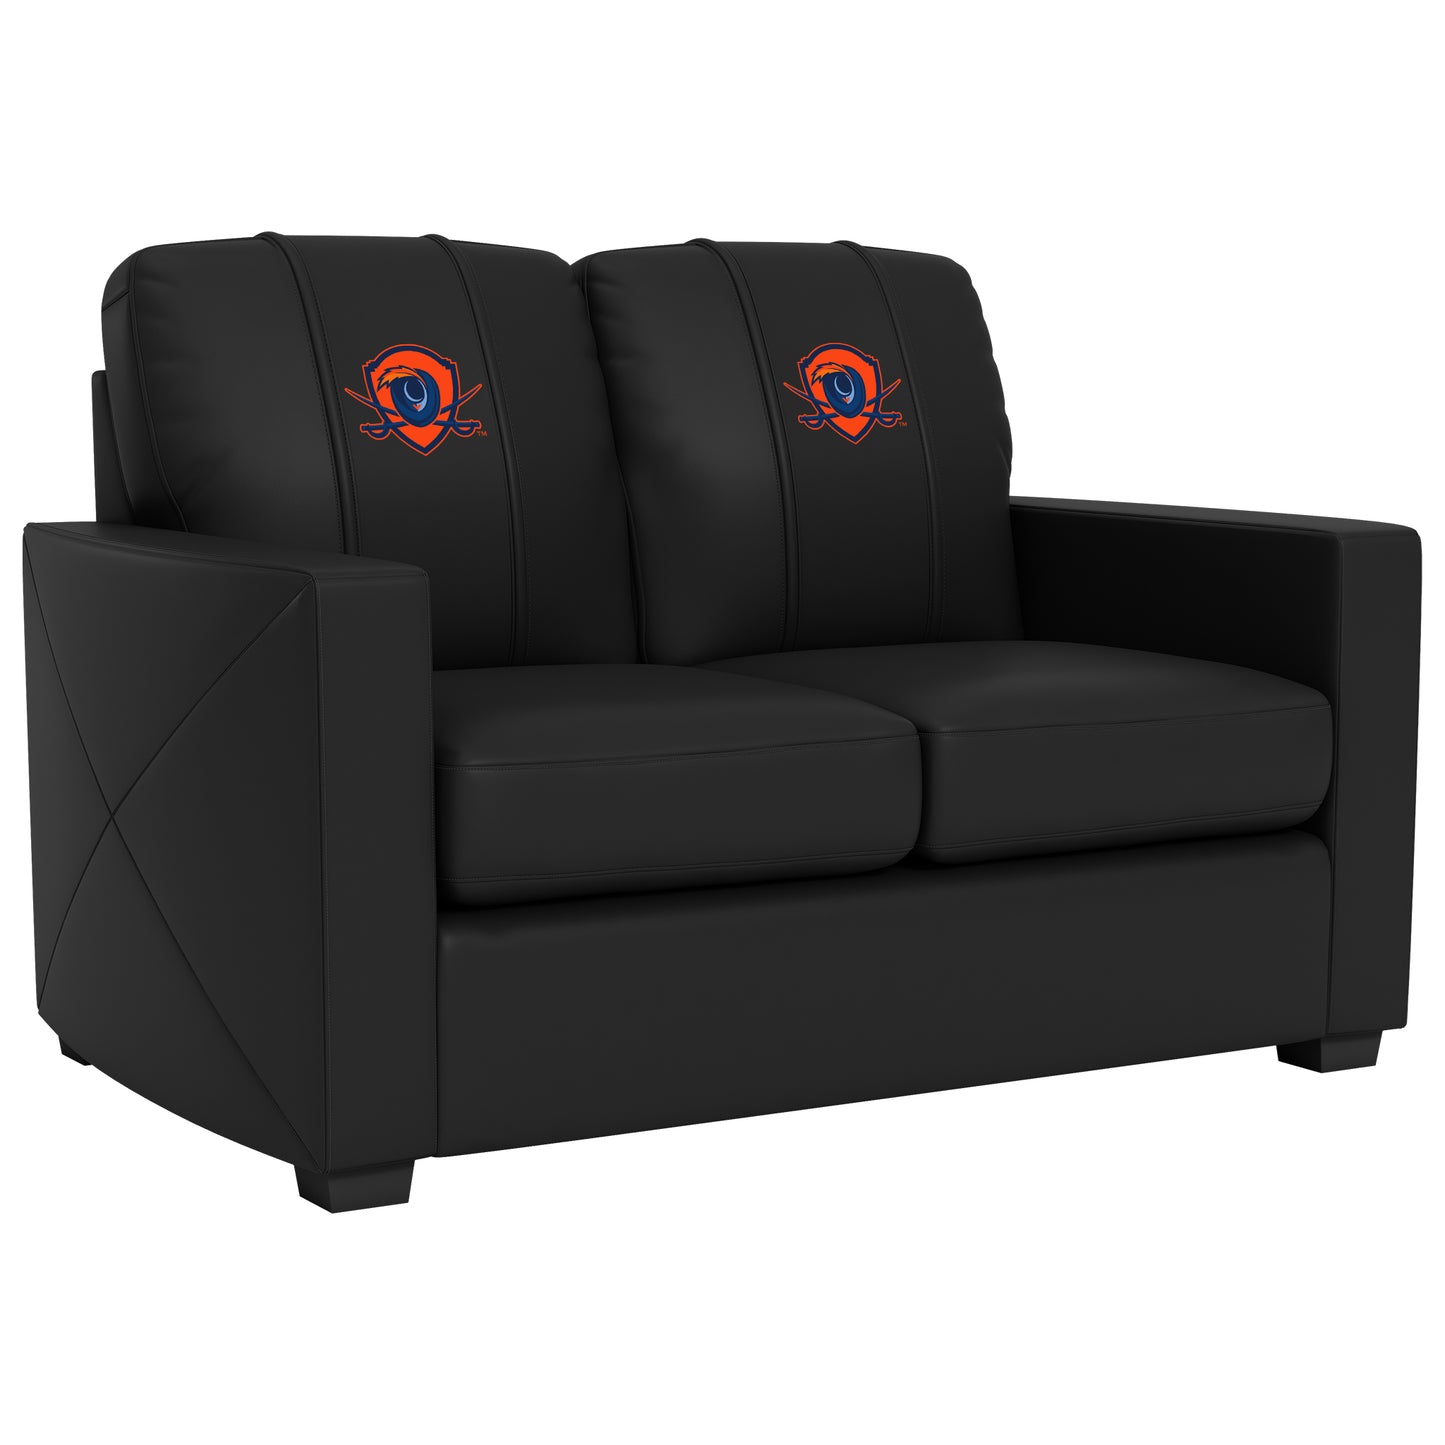 Silver Loveseat with Virginia Cavaliers Secondary Logo